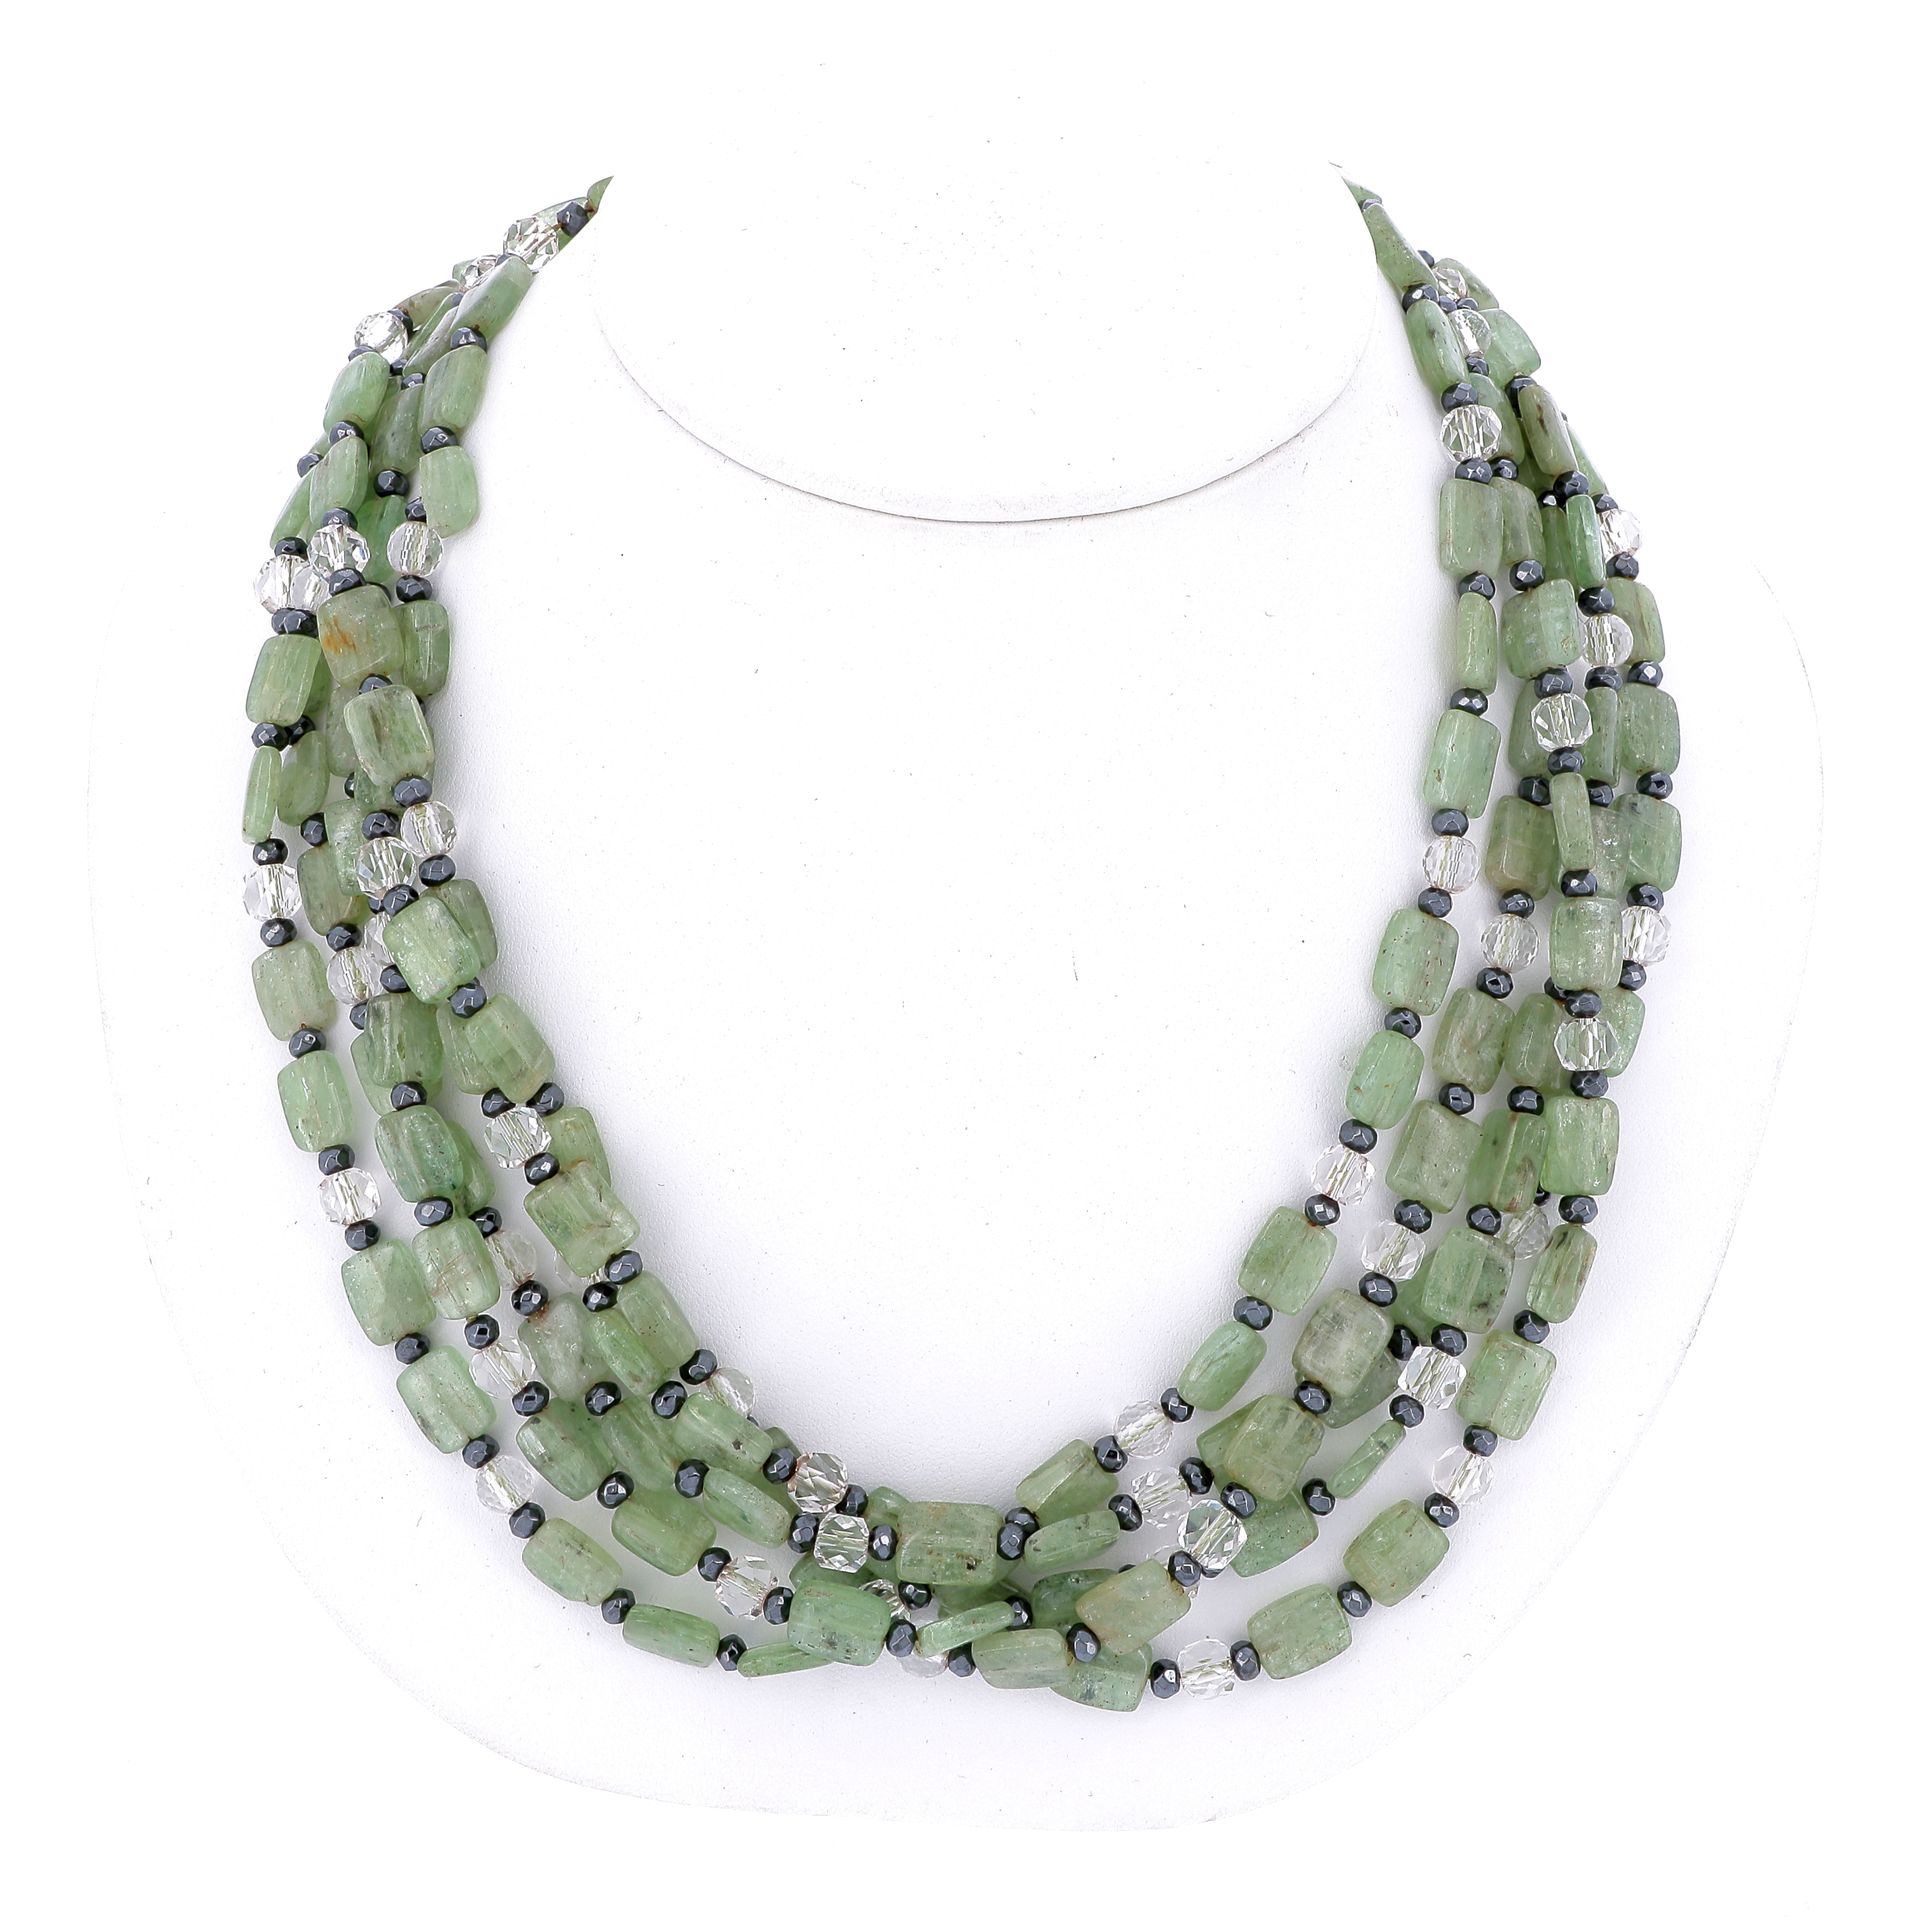 Null NECKLACE

Five rows of flat peridot beads alternating with faceted rock cry&hellip;